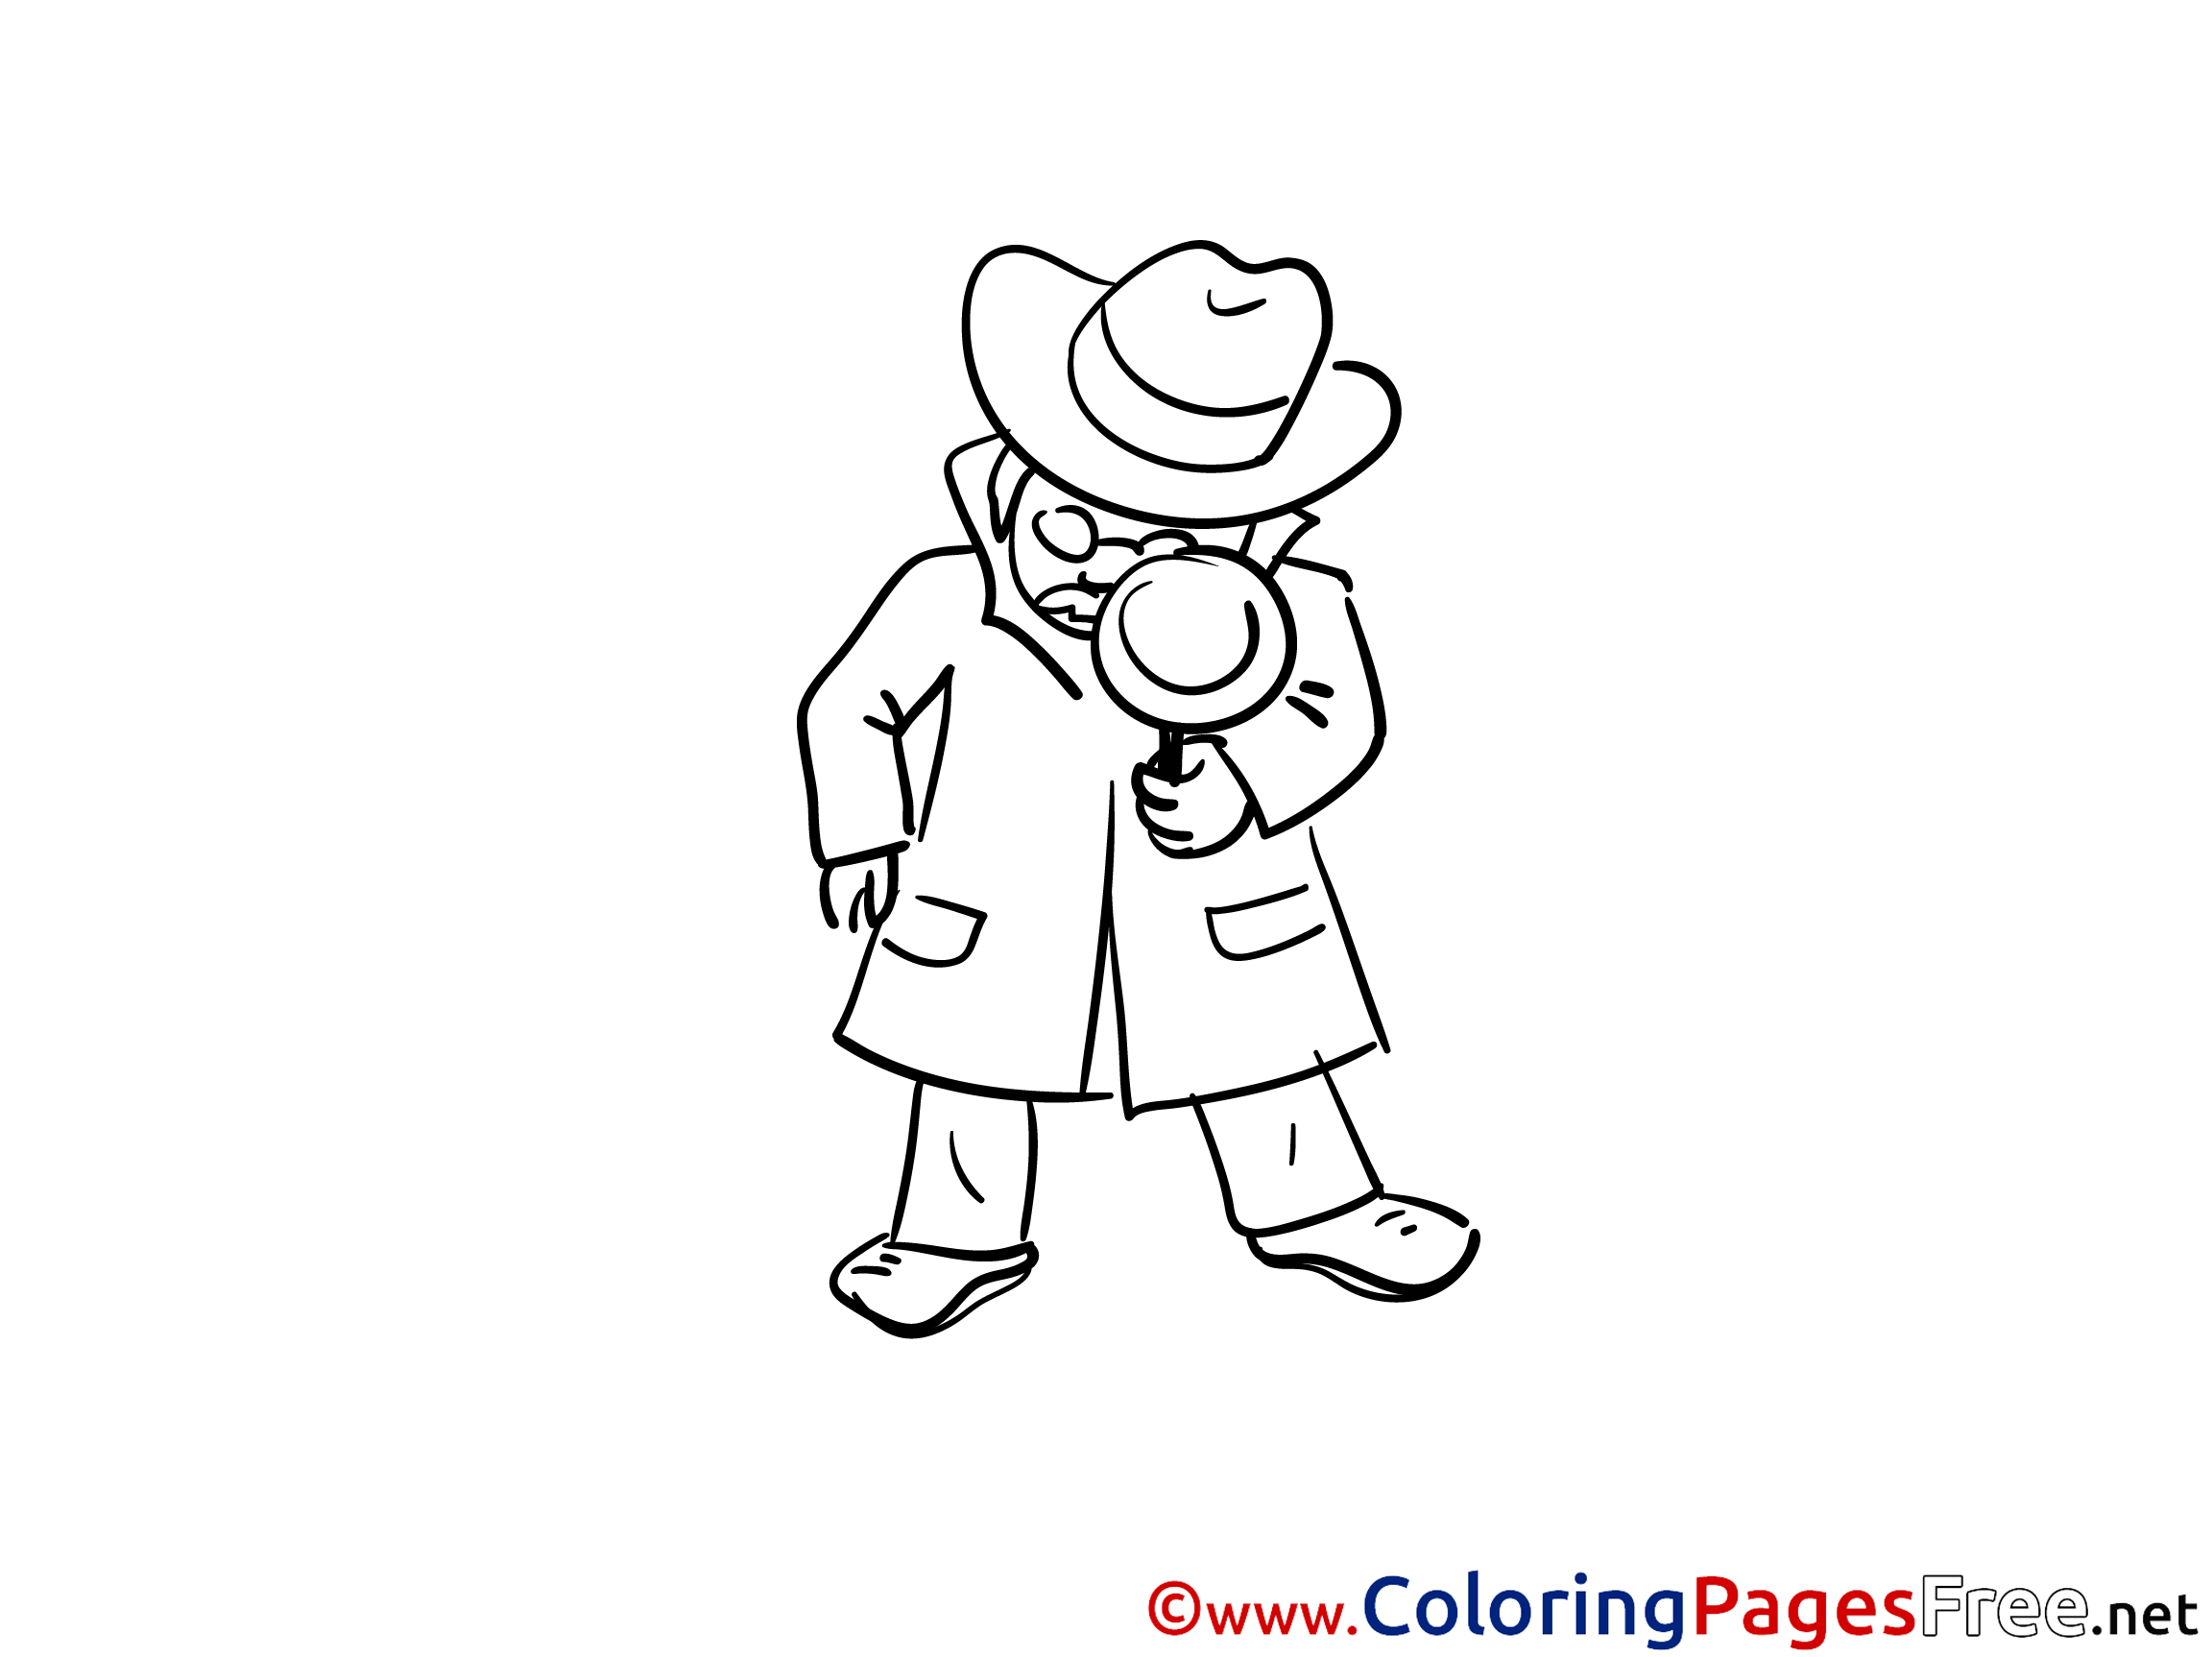 Detective for free Coloring Pages download